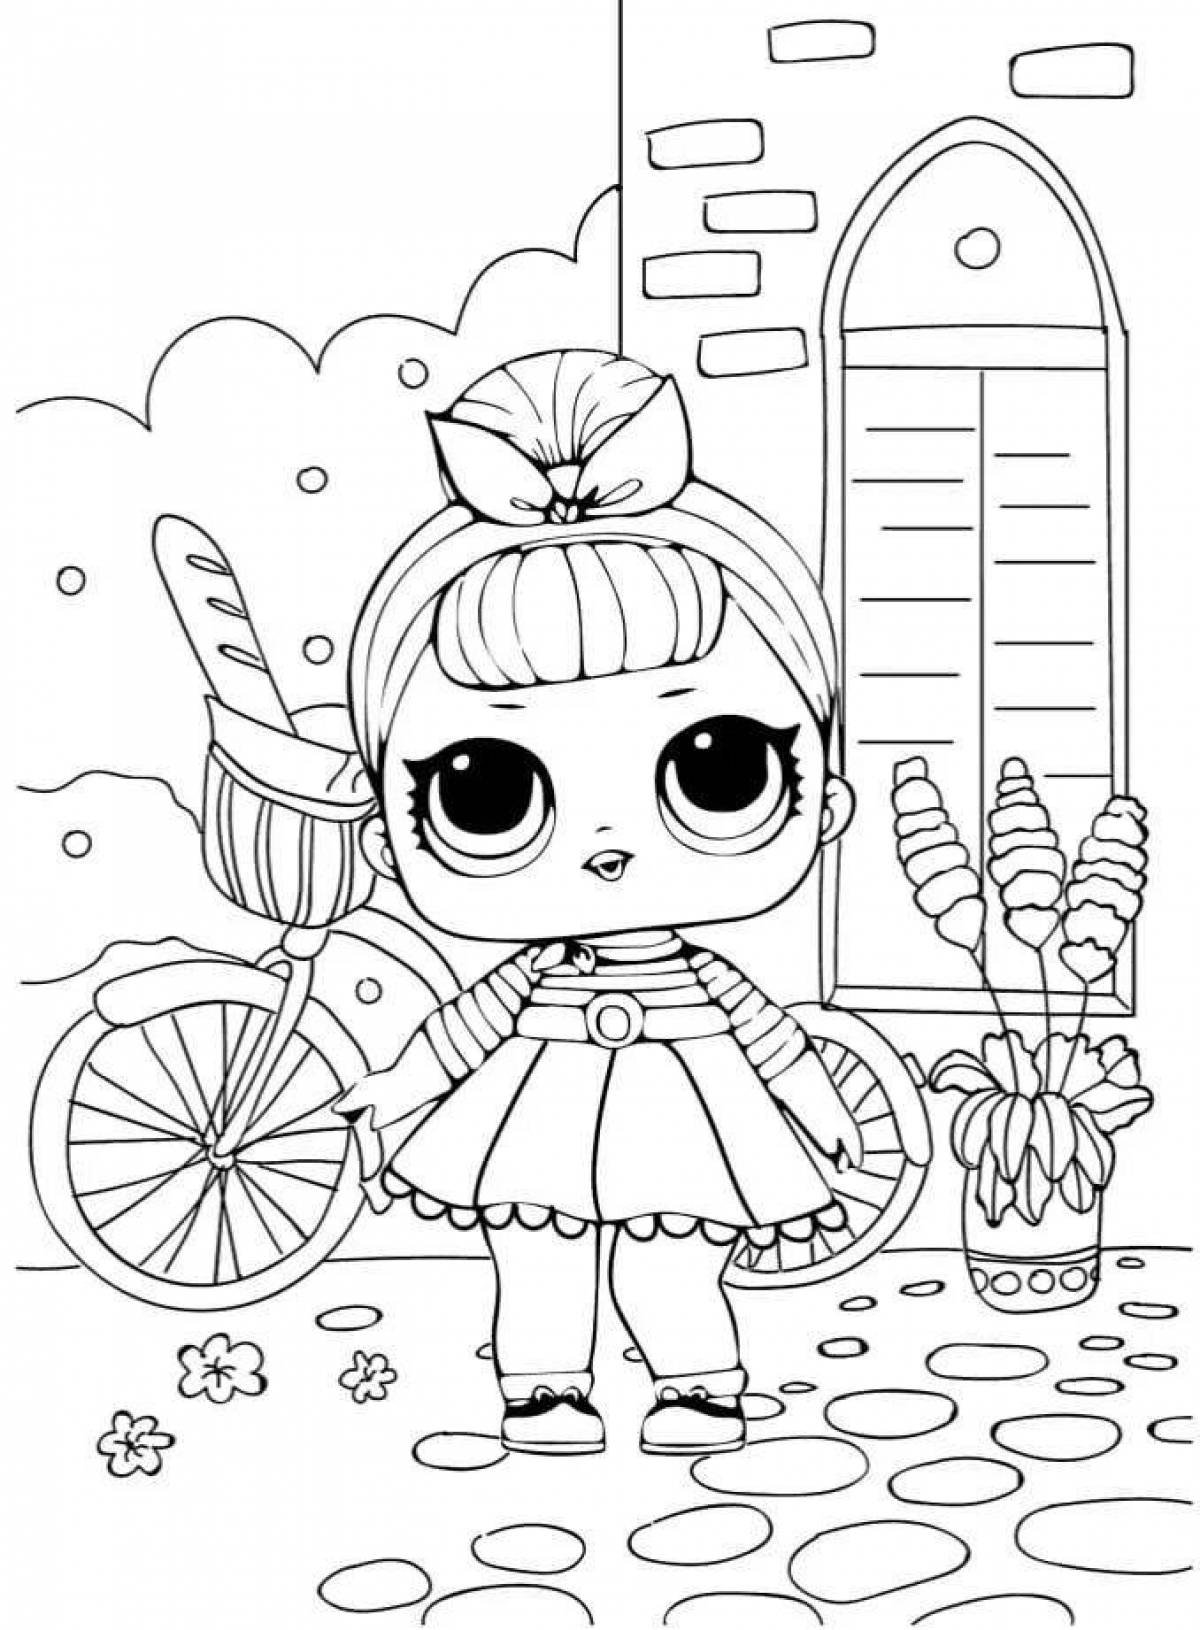 Color-cute coloring page lol for kids